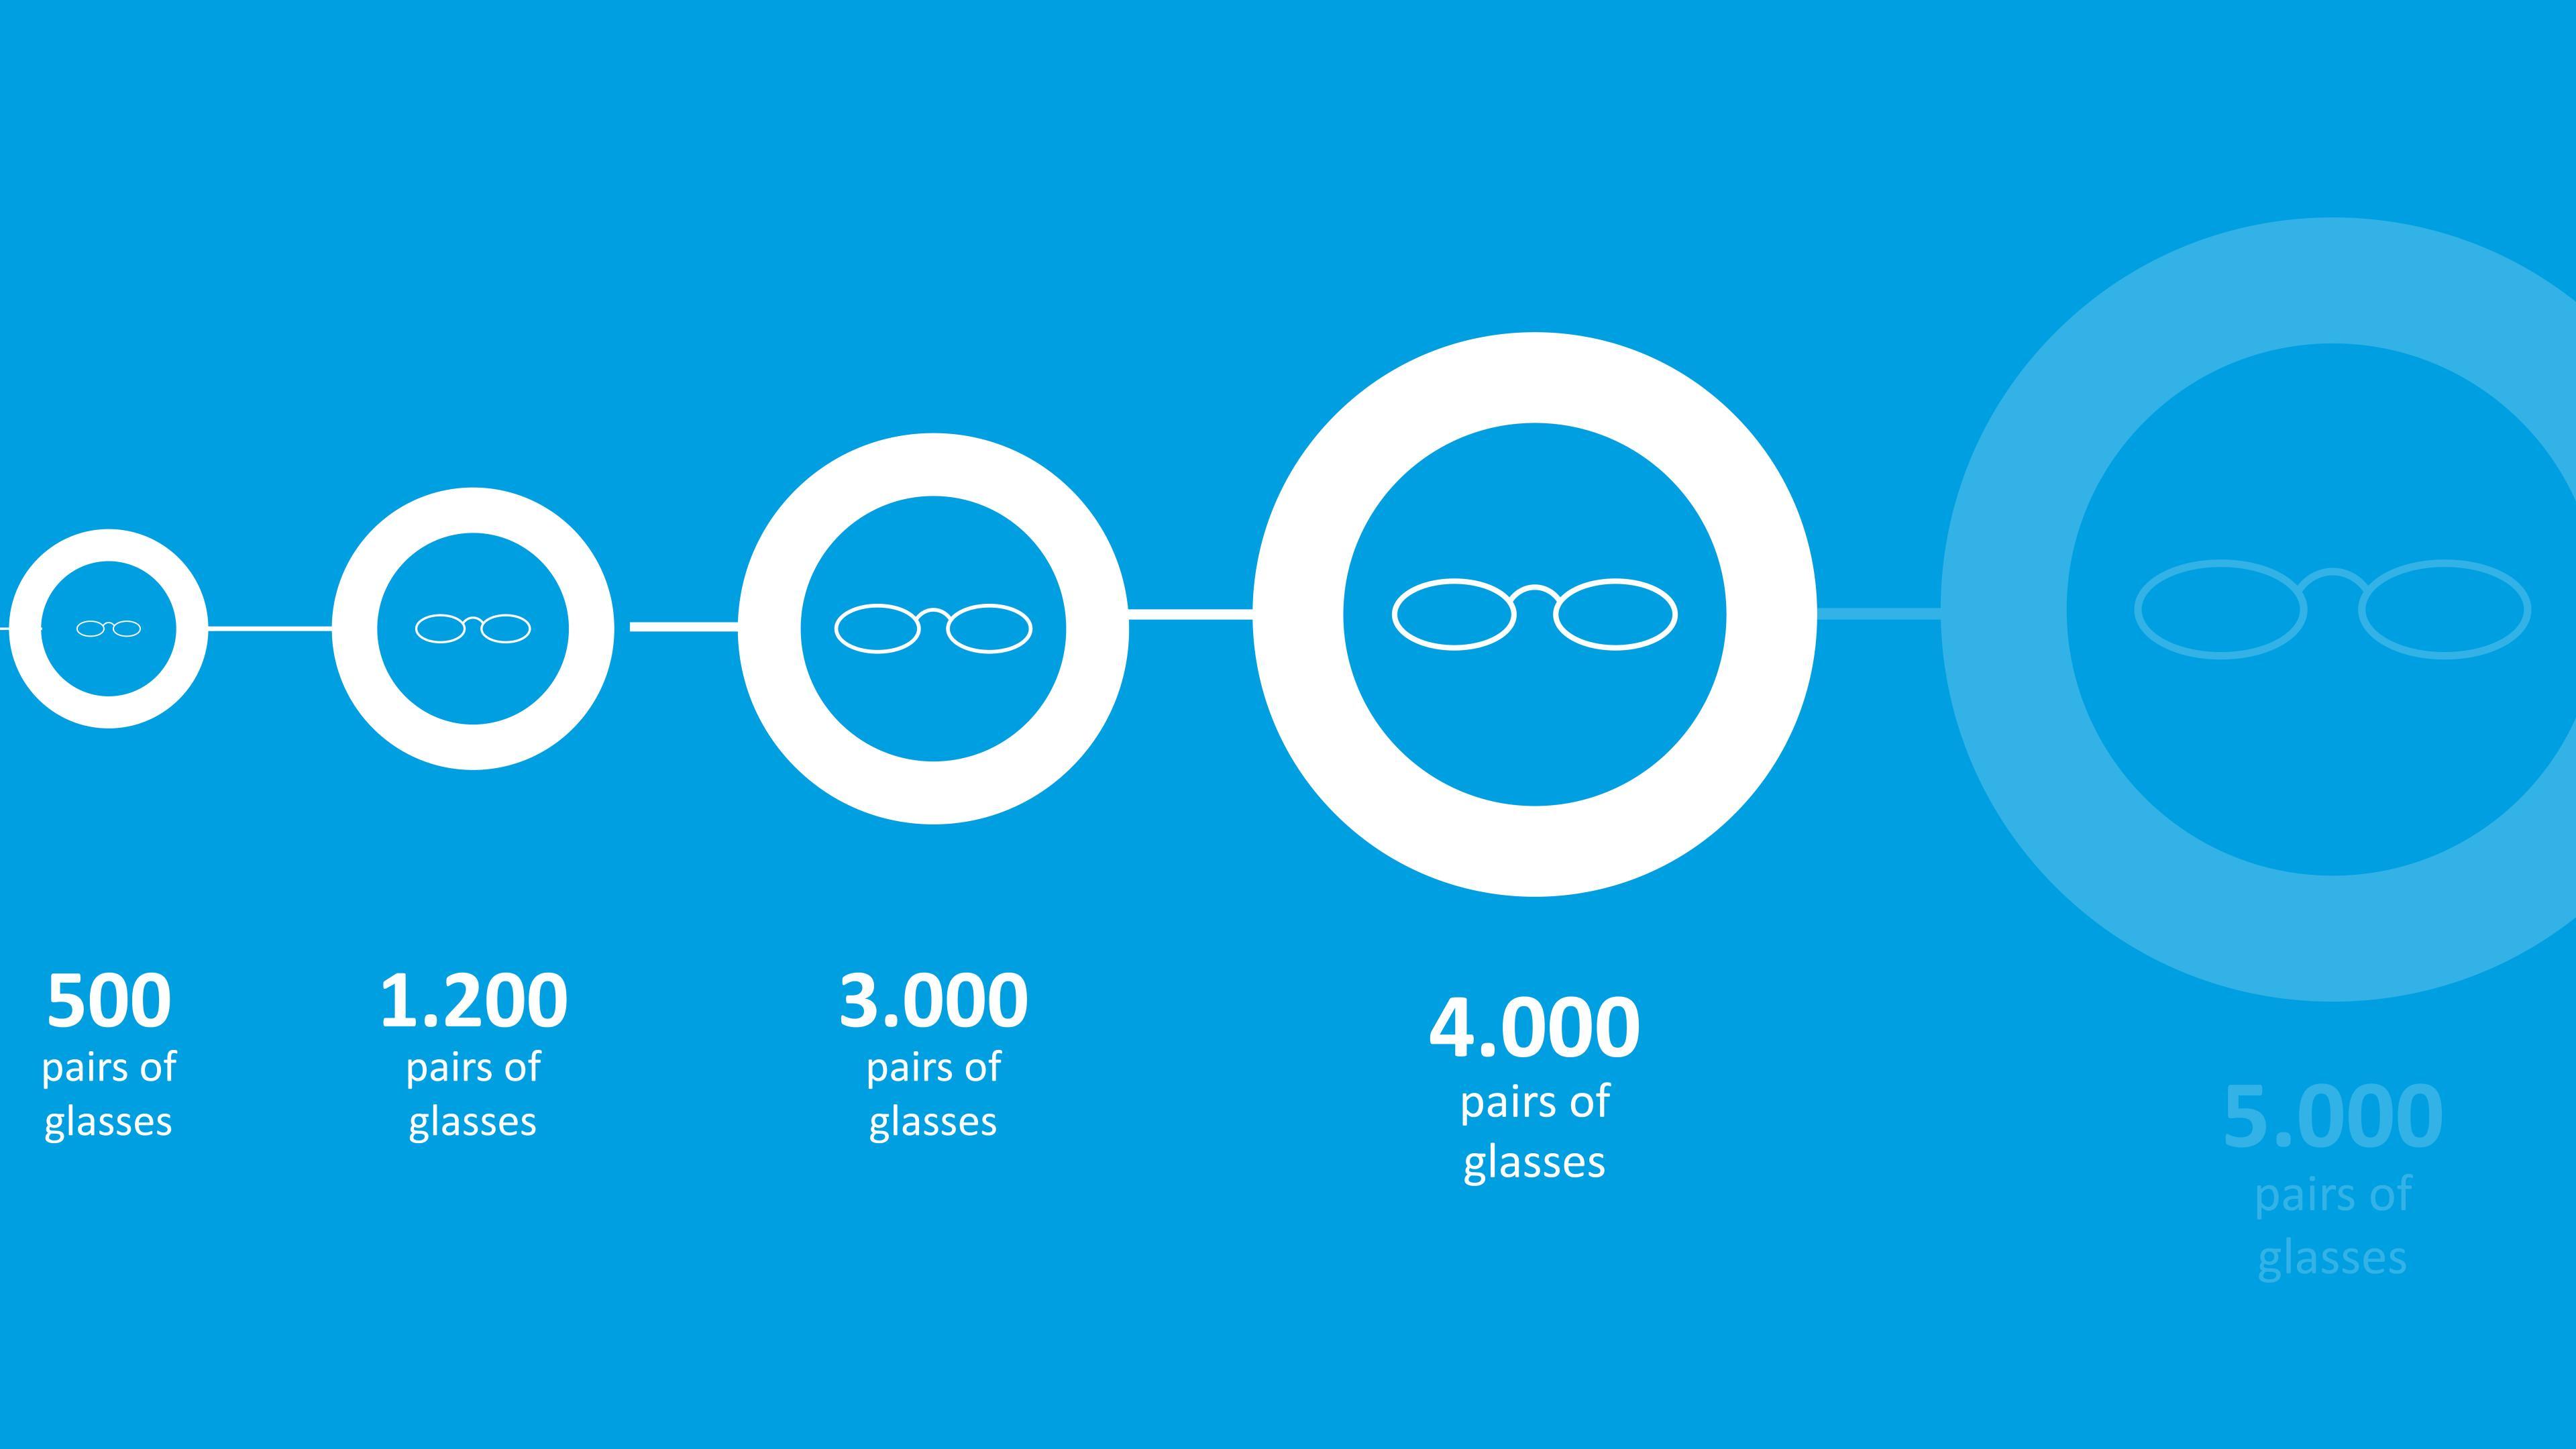 Infographic number of glasses